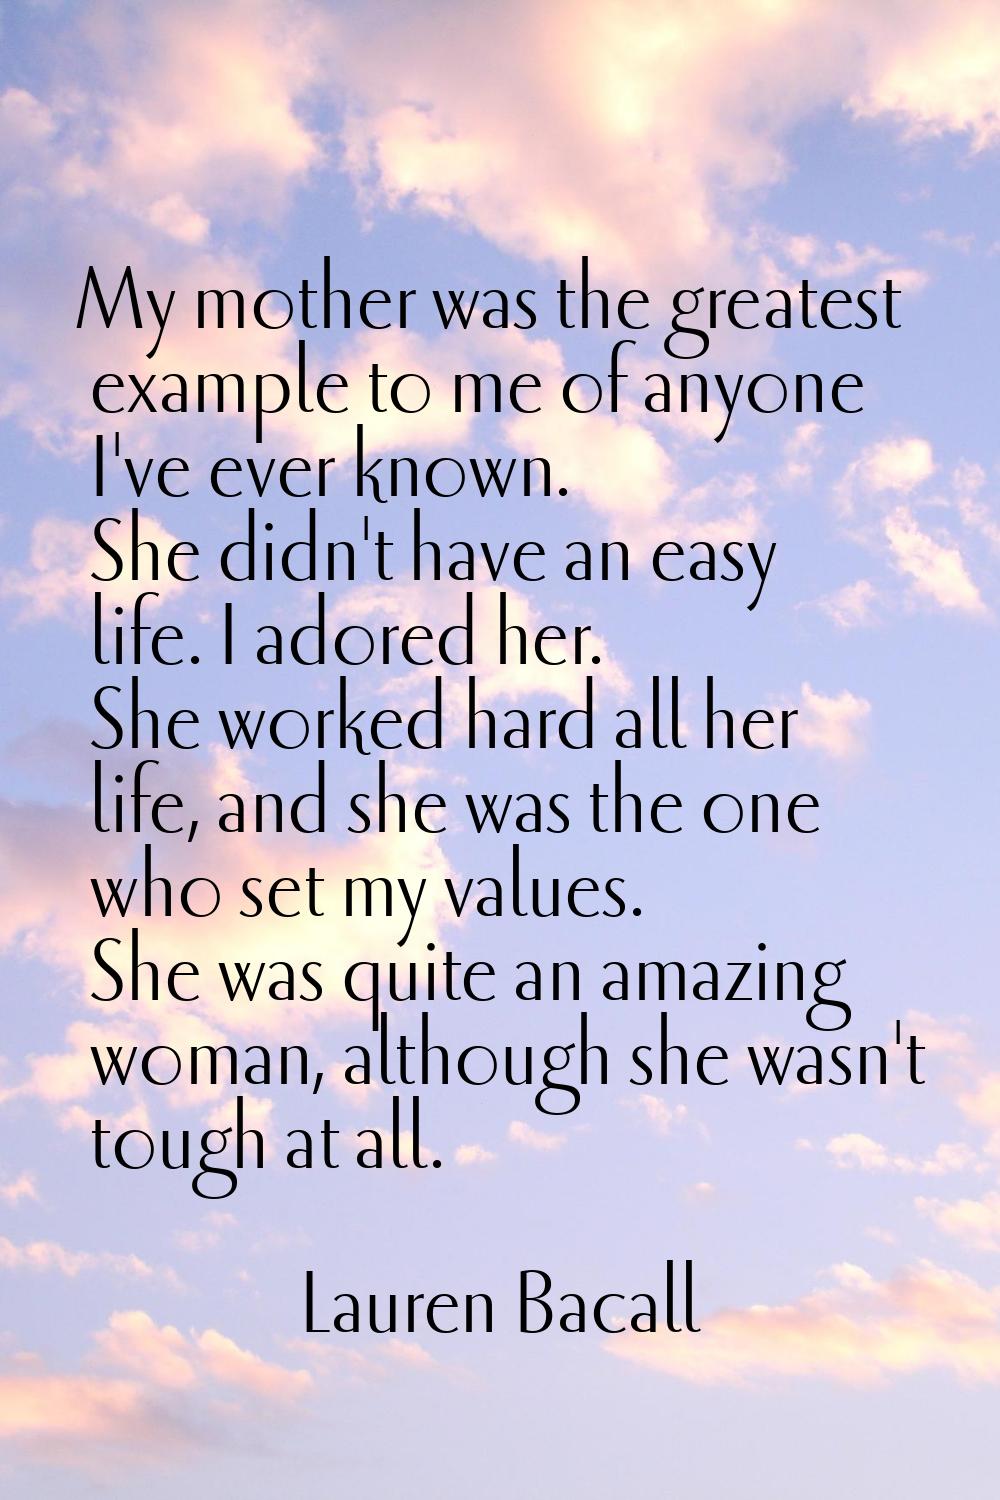 My mother was the greatest example to me of anyone I've ever known. She didn't have an easy life. I